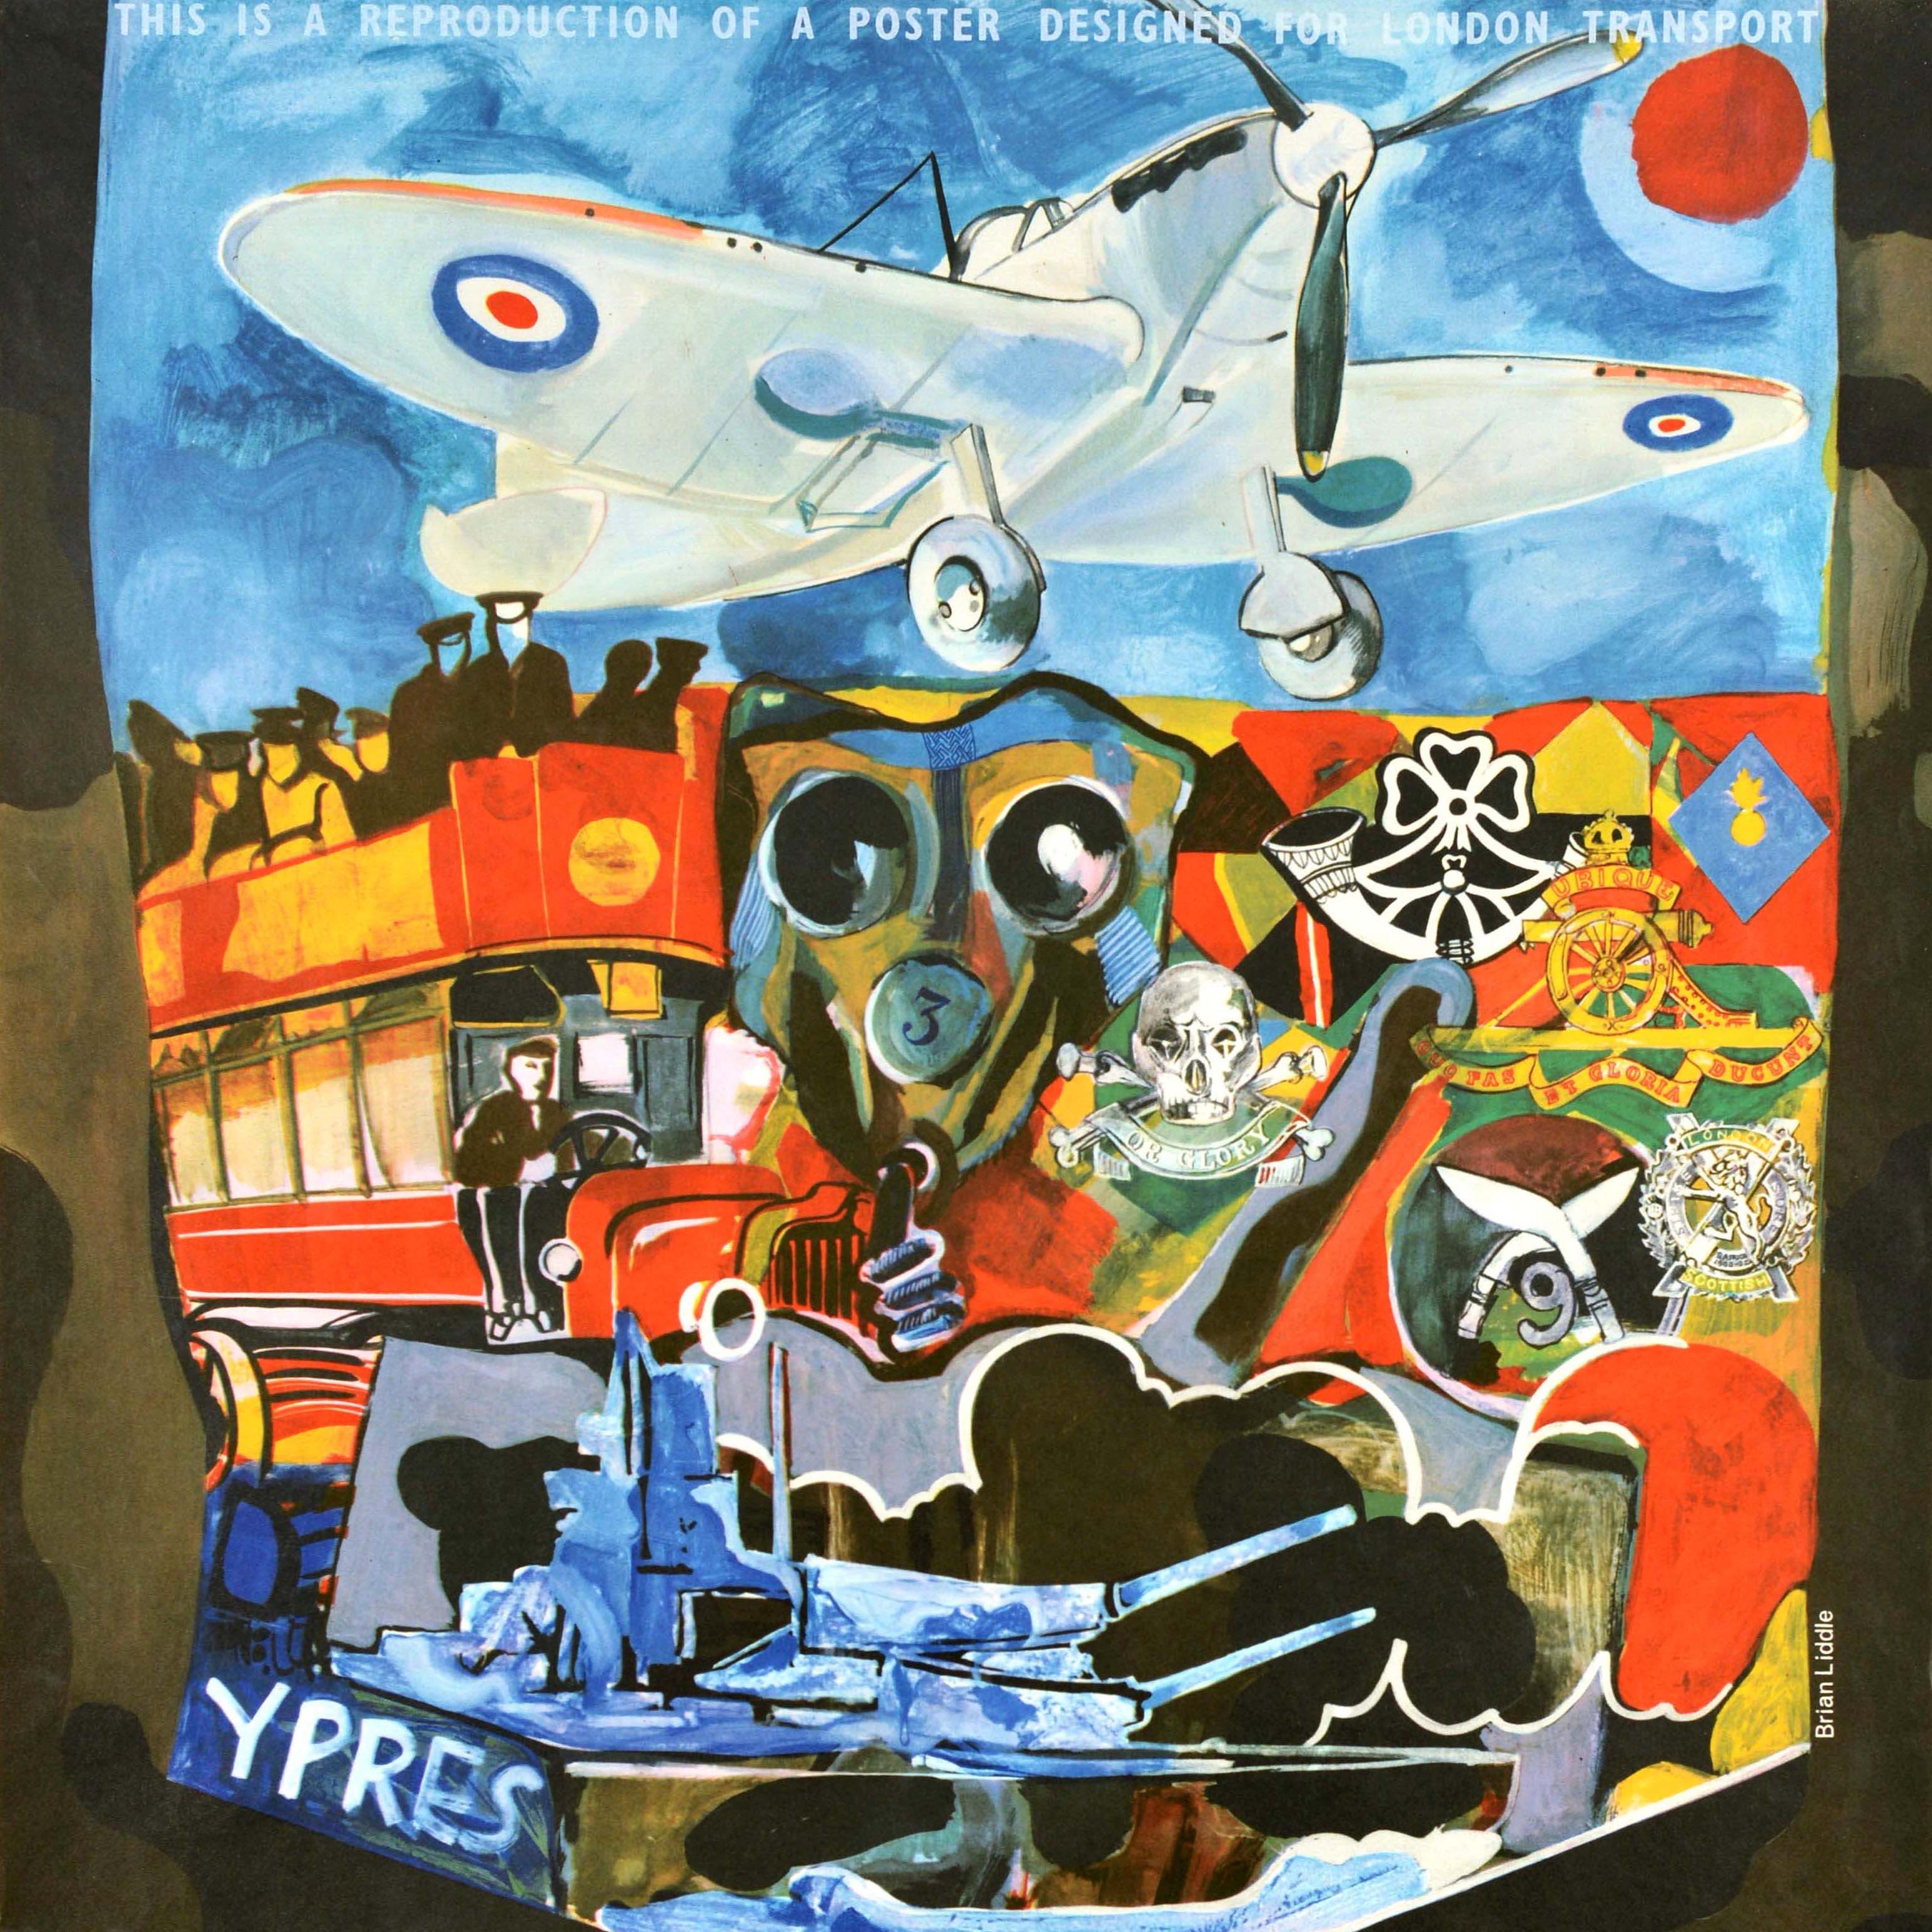 British Vintage Official Reproduction Poster Imperial War Museum London Transport Liddle For Sale